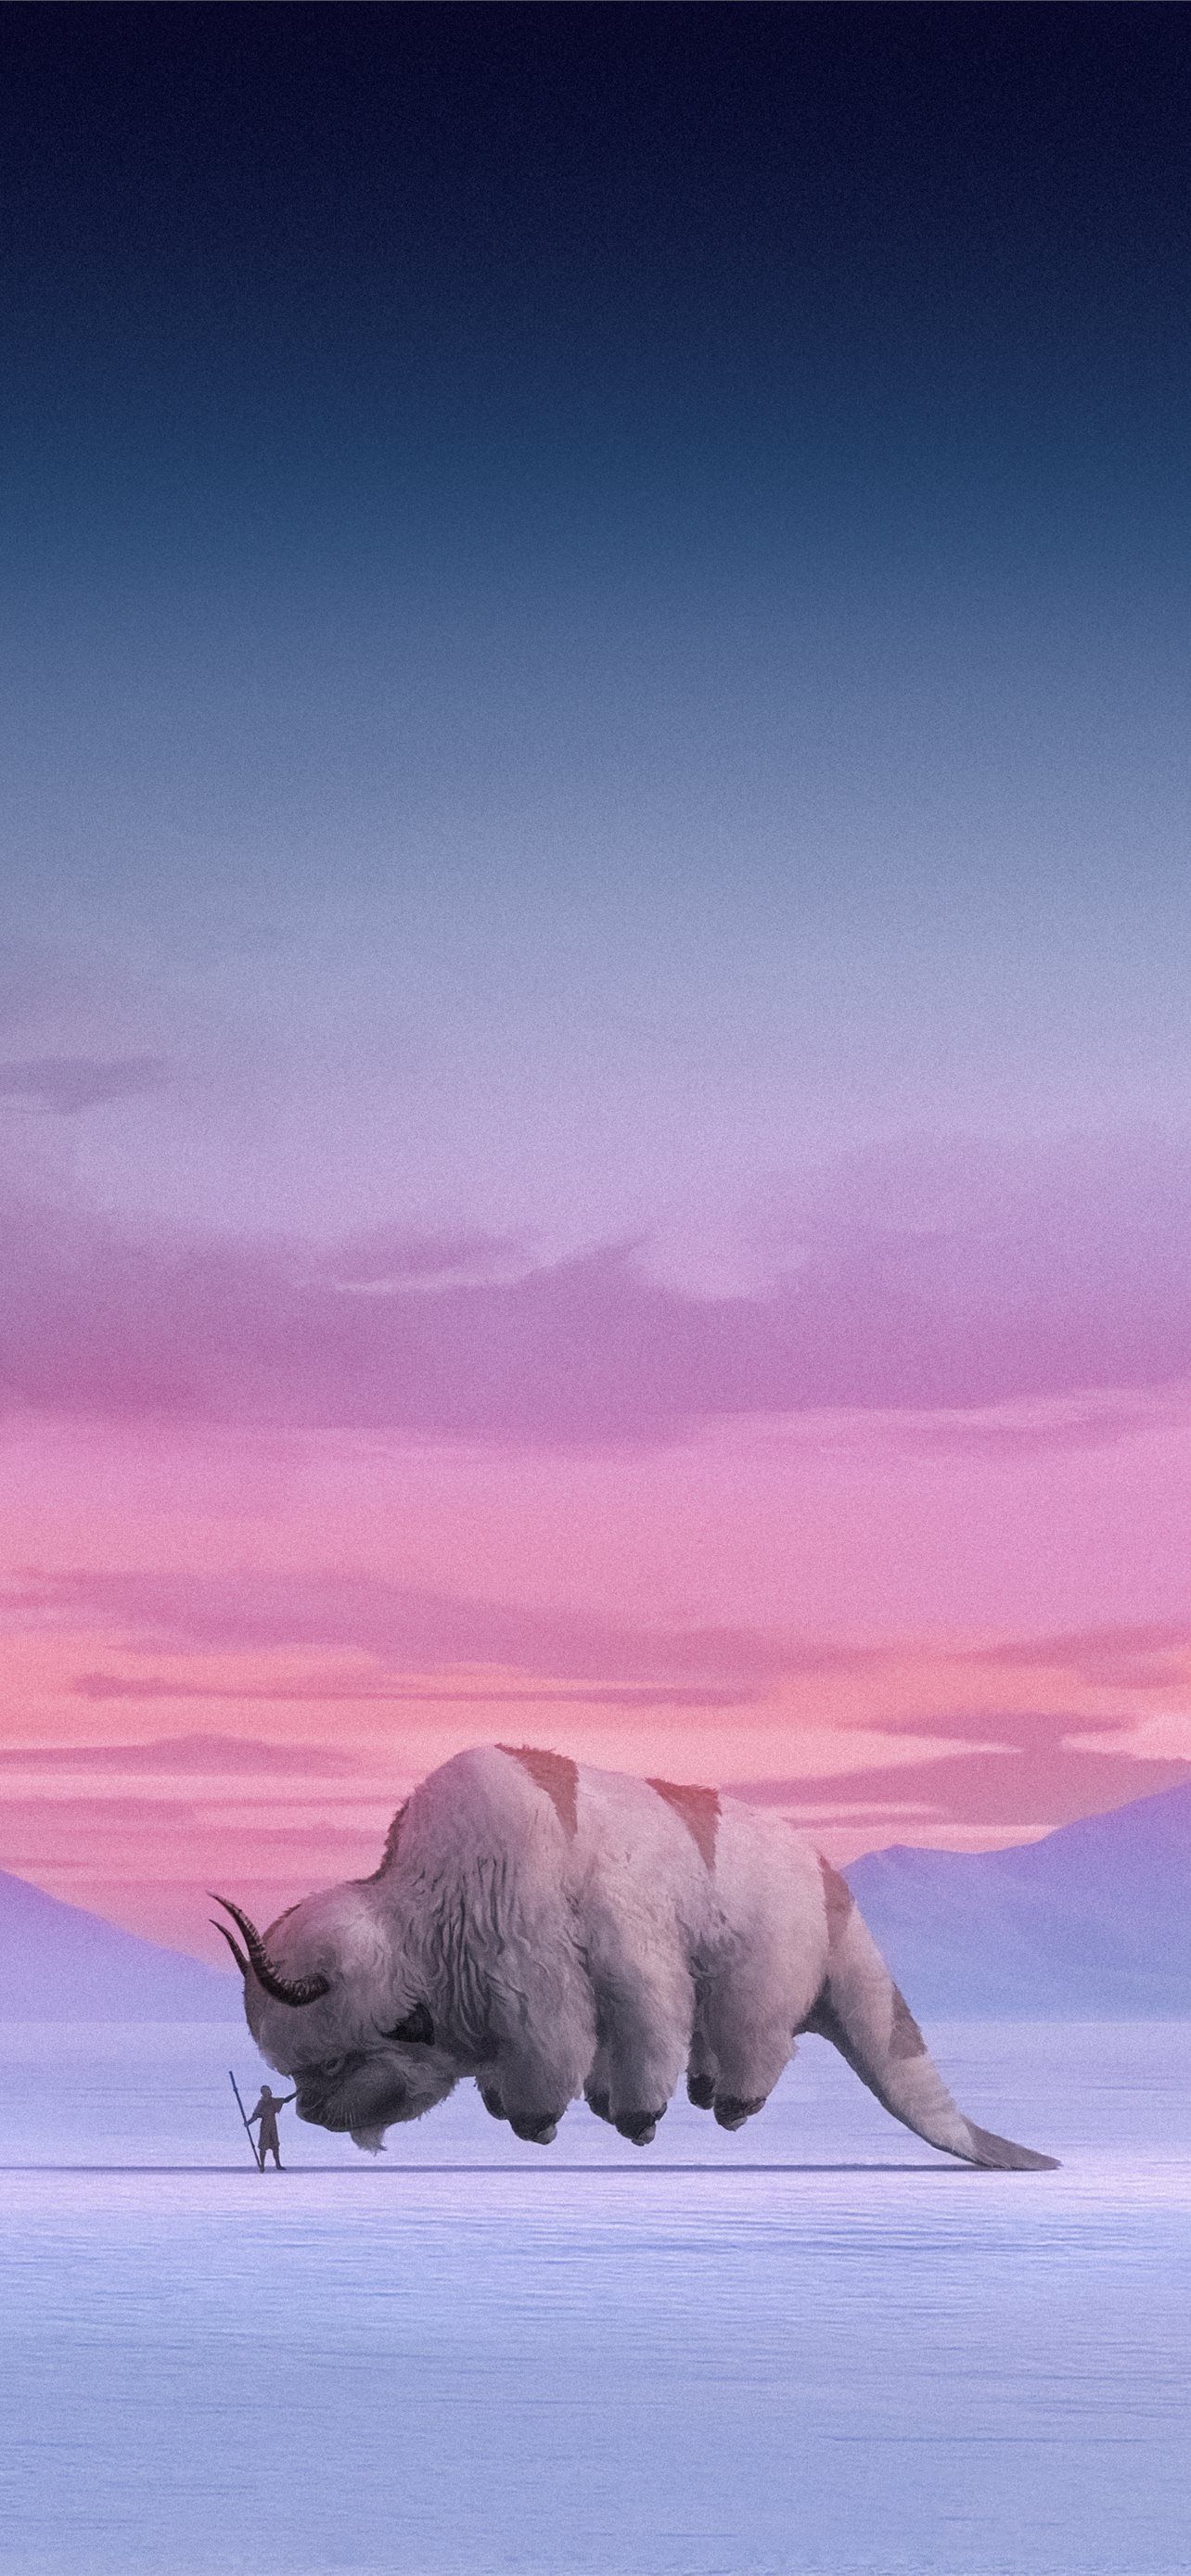 Avatar Aesthetic Cave iPhone Wallpaper Free Download